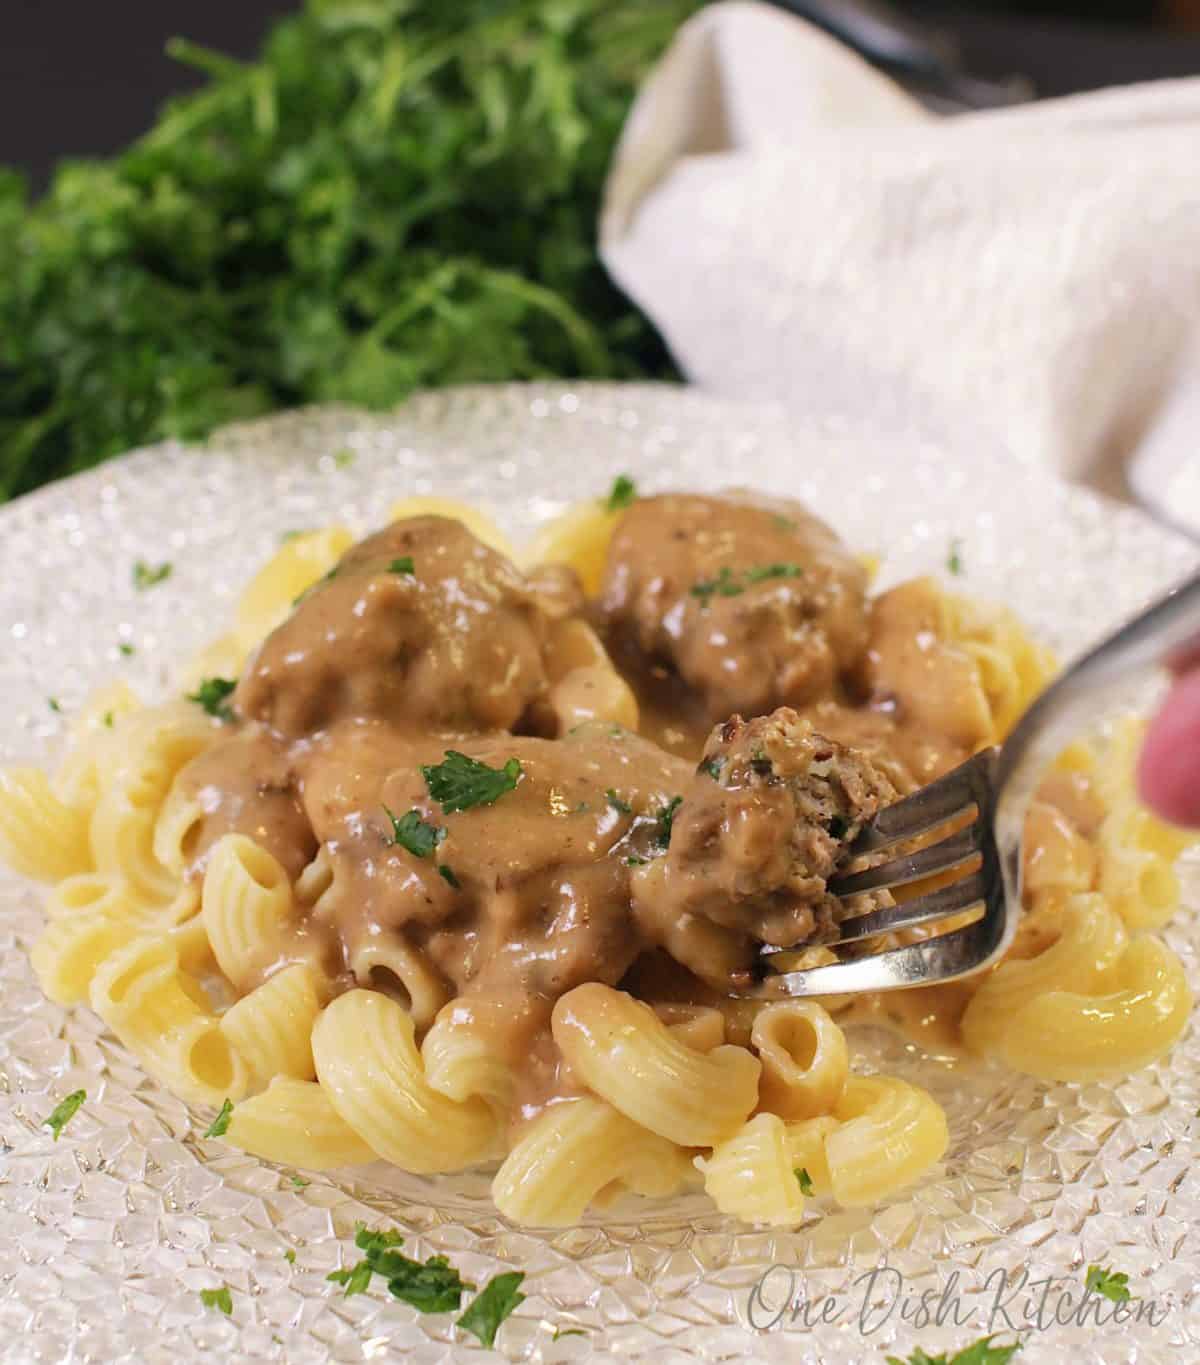 A fork picking up a meatball from a plate of buttered noodles topped with Swedish meatballs.